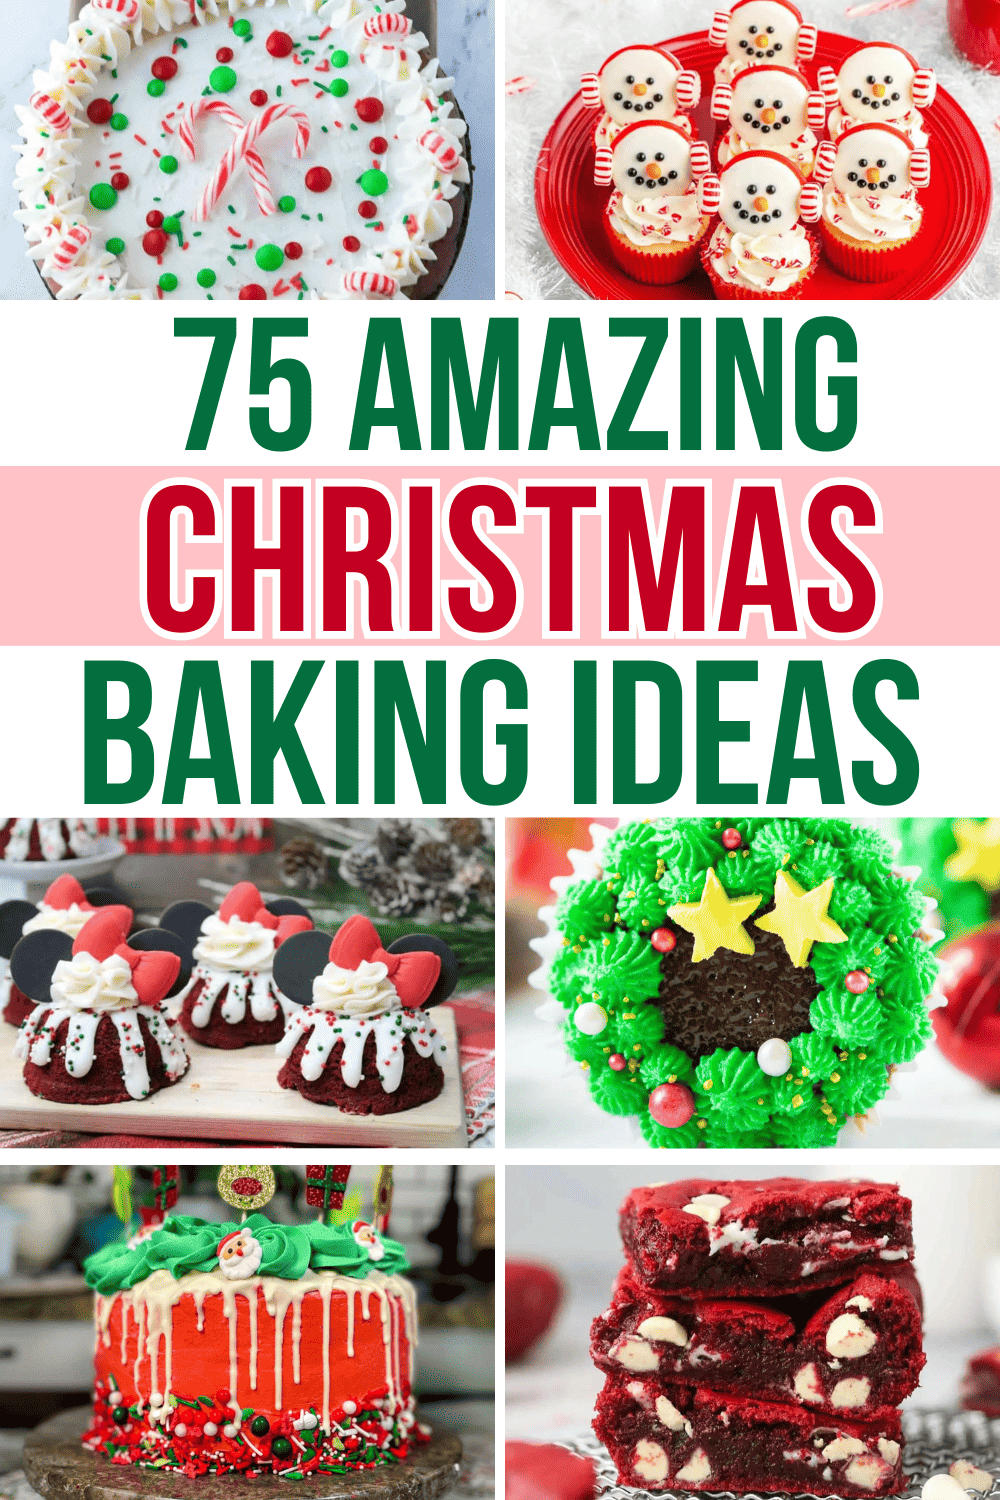 Easy Christmas baking ideas and cute Christmas desserts! The best christmas baking recipes desserts, christmas cookies recipes holiday xmas baking, xmas baking ideas holiday treats, elegant holiday desserts christmas dinners, easy xmas baking ideas for kids, christmas baked goods to sell, christmas dessert recipes baking parties, homemade baked goods christmas gifts, holiday baking recipes christmas simple, christmas baking ideas easy 4 ingredients, christmas baking ideas cupcakes, xmas recipes.